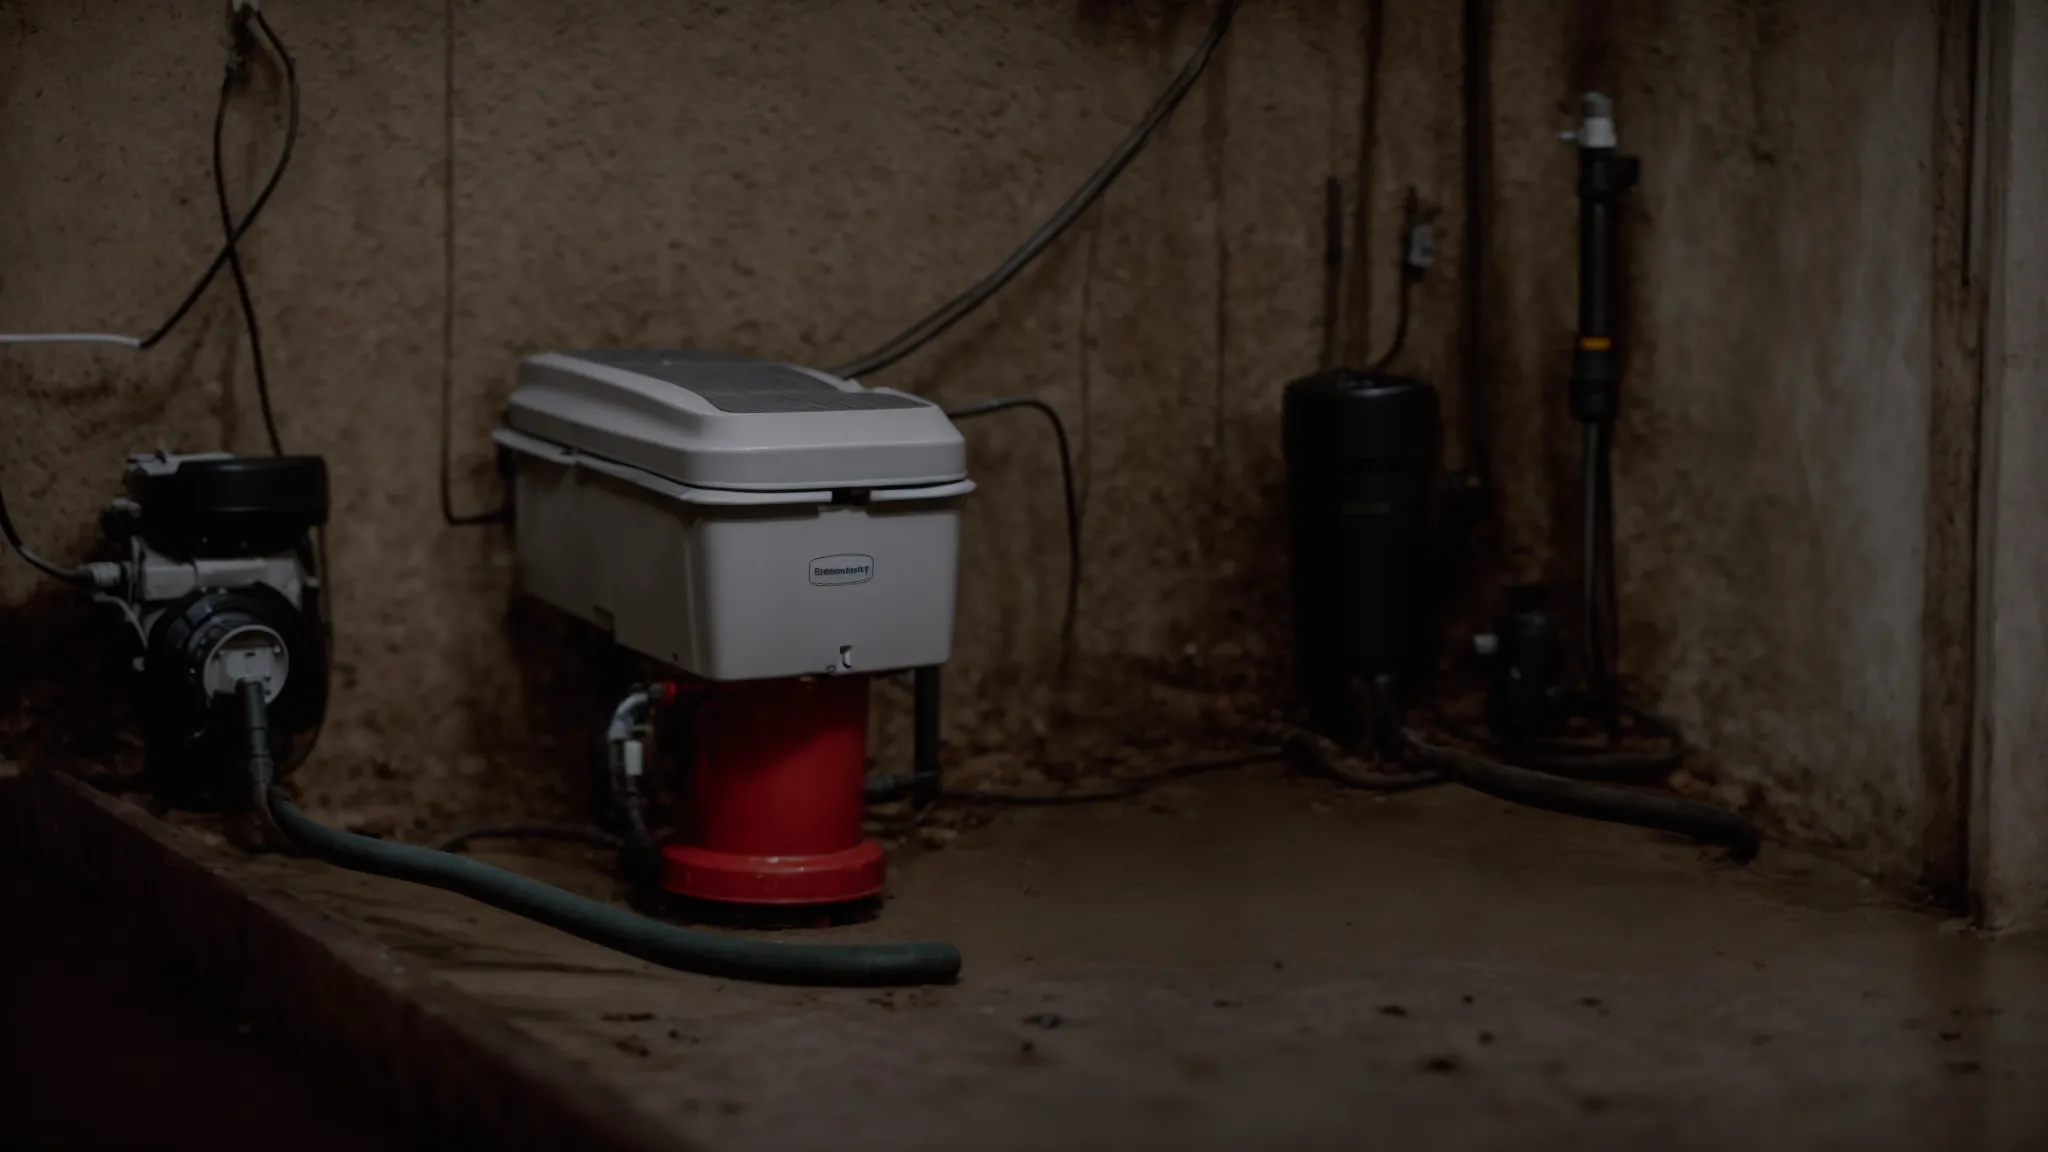 a sump pump sits idle in a clean, dry basement, awaiting use during a power outage.